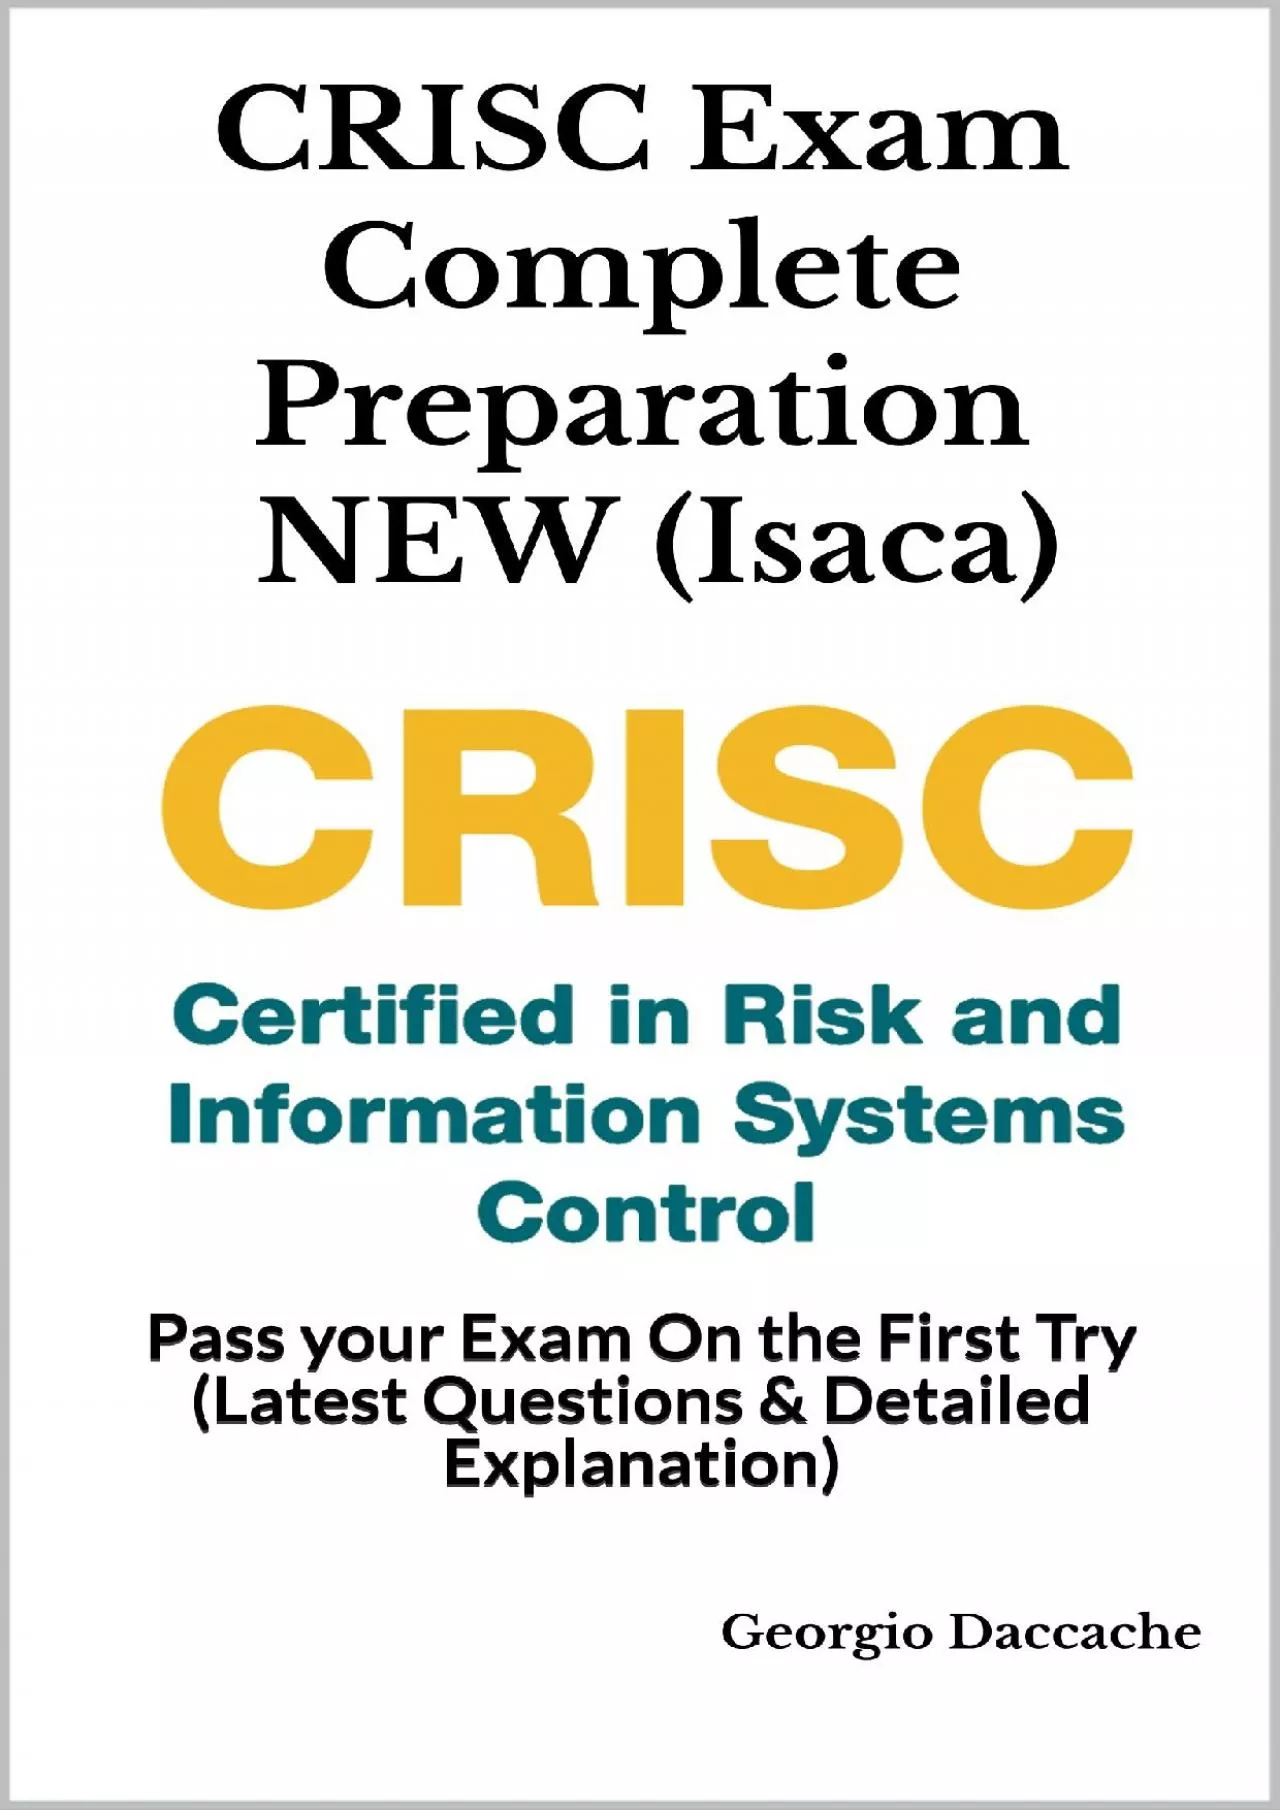 [READING BOOK]-CRISC Exam Complete Preparation NEW (Isaca): Pass your Exam On the First